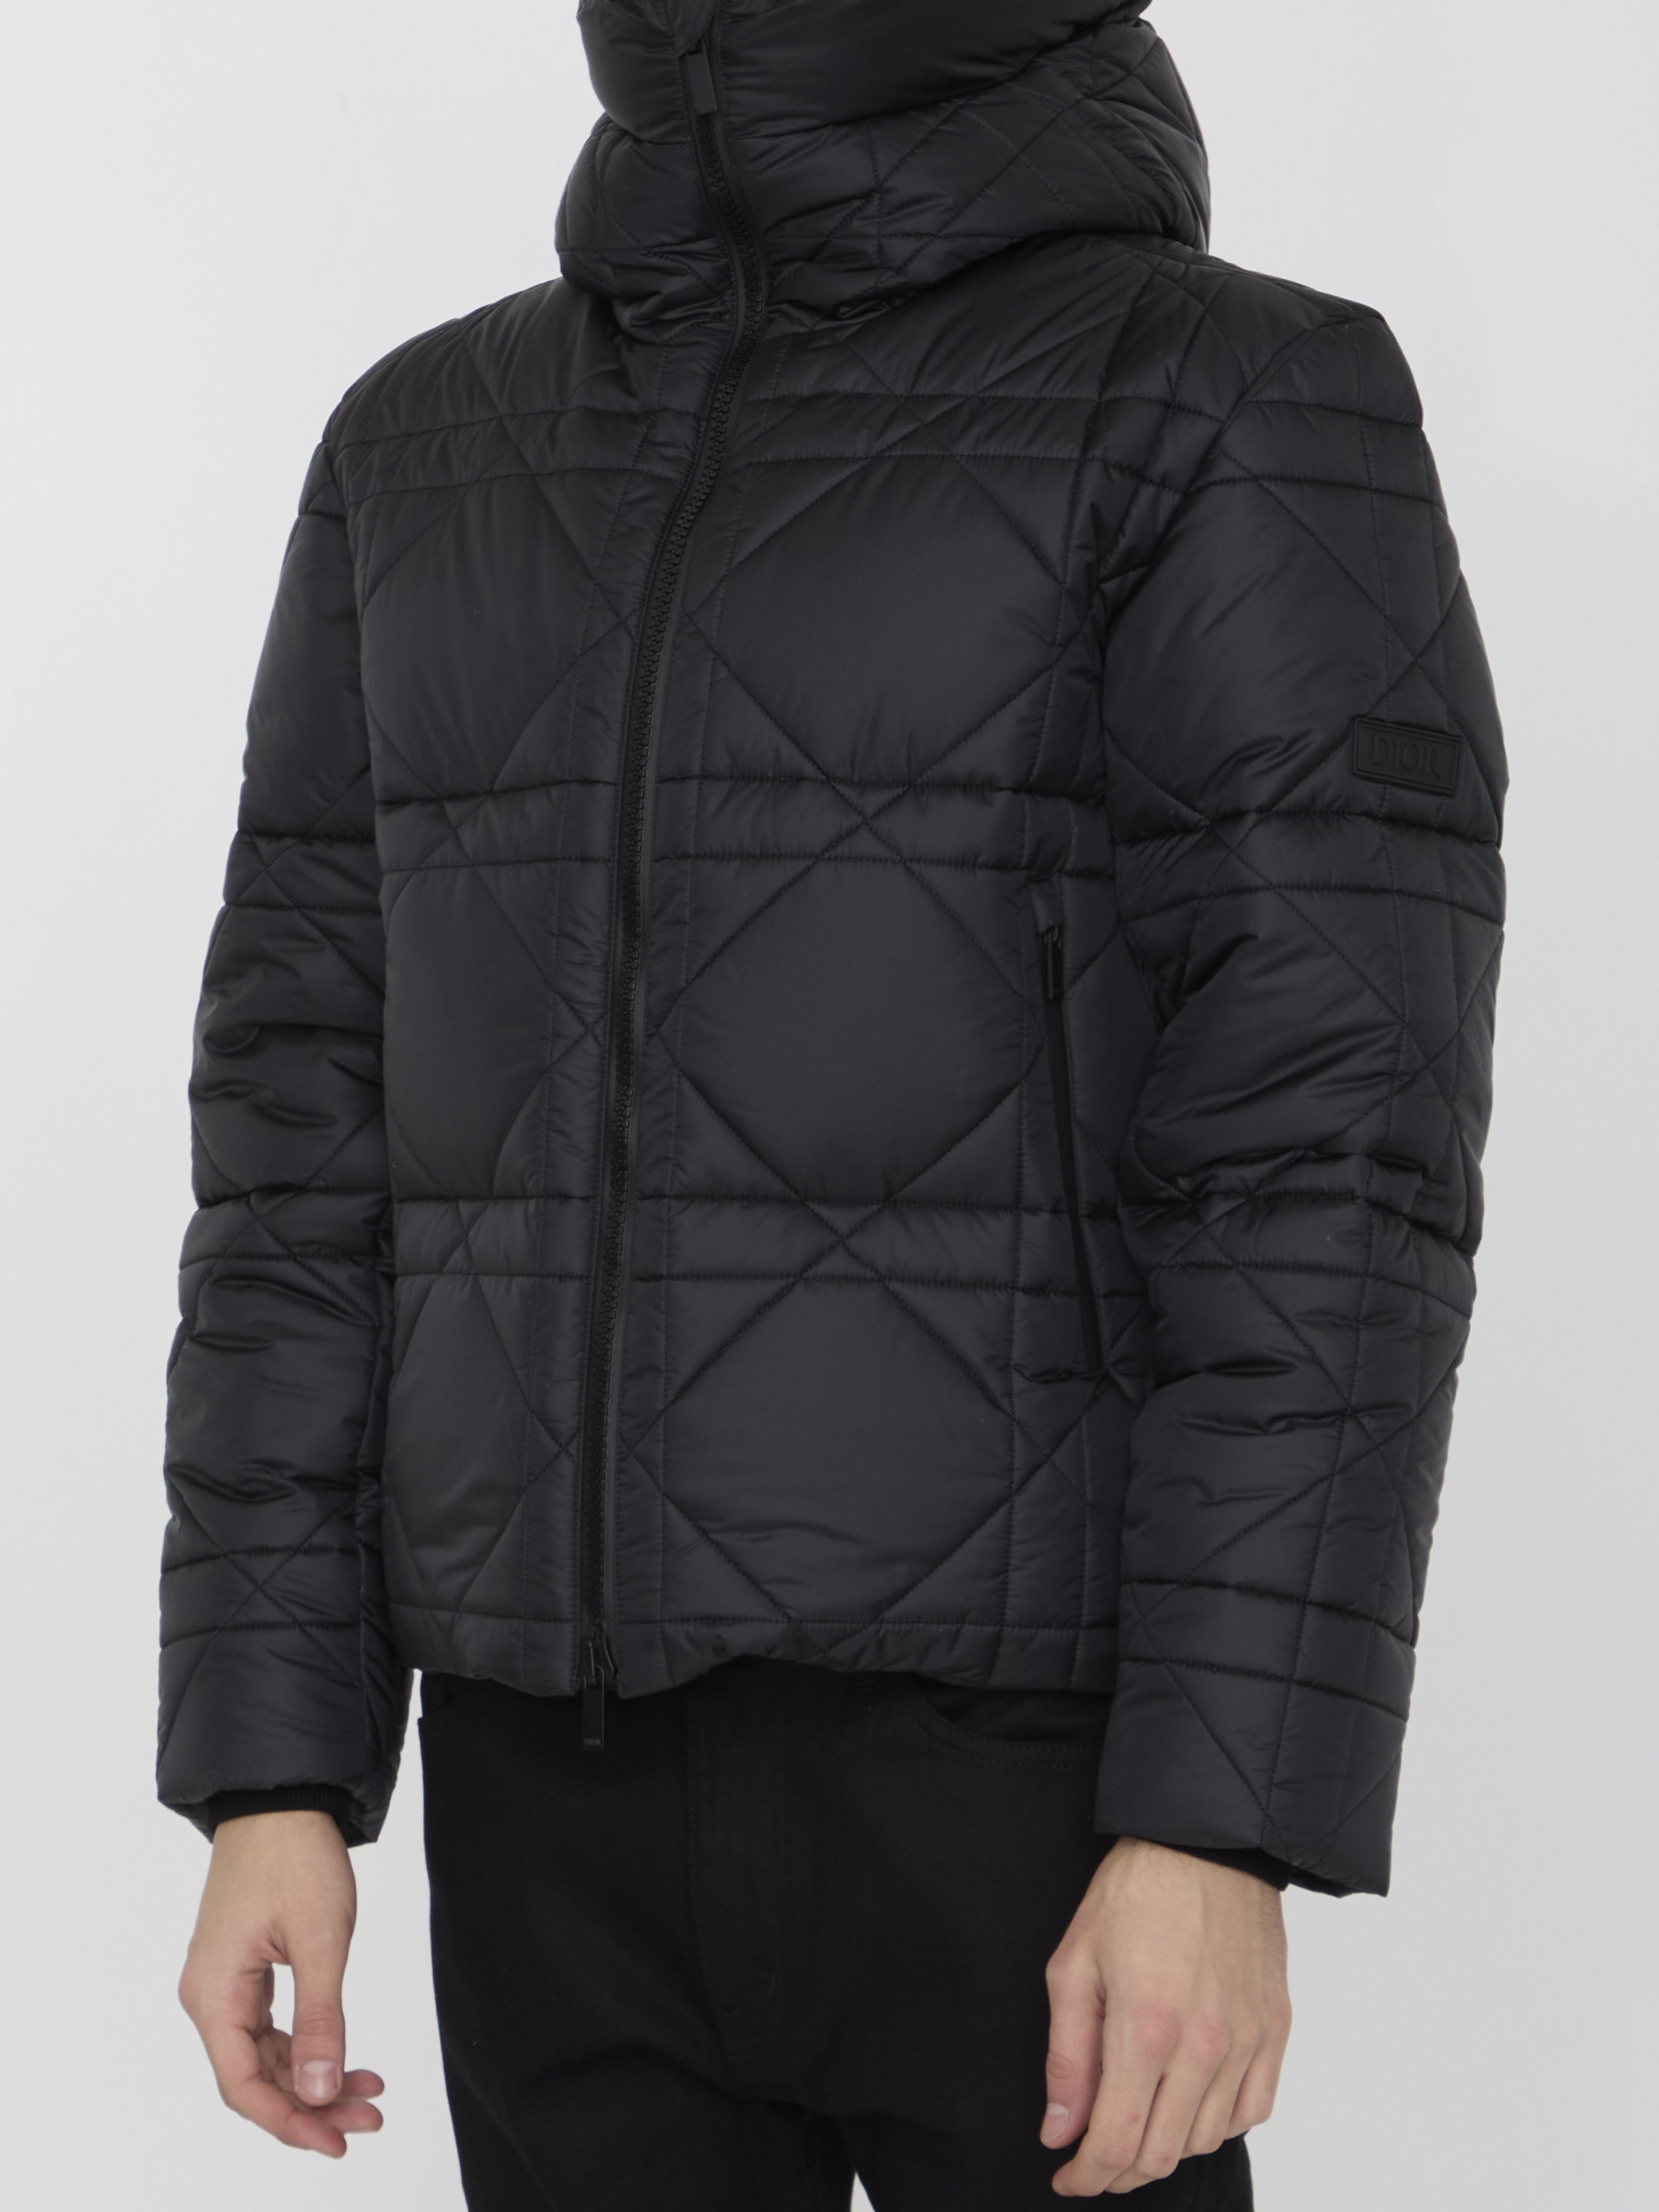 DIOR-HOMME-OUTLET-SALE-Cannage-puffer-jacket-Jacken-Mantel-50-BLACK-ARCHIVE-COLLECTION-2.jpg